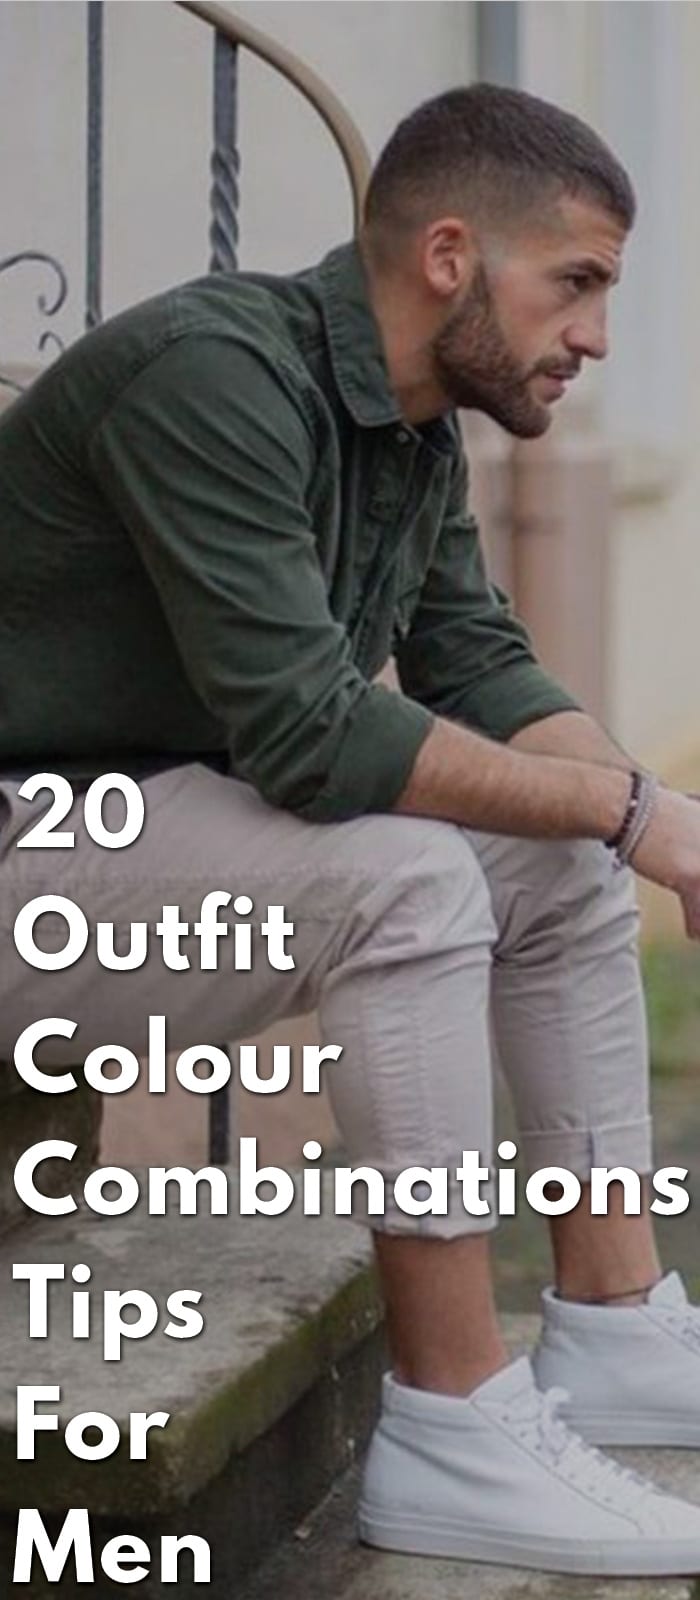 20-Outfit-Colour-Combinations-Tips-For-Men